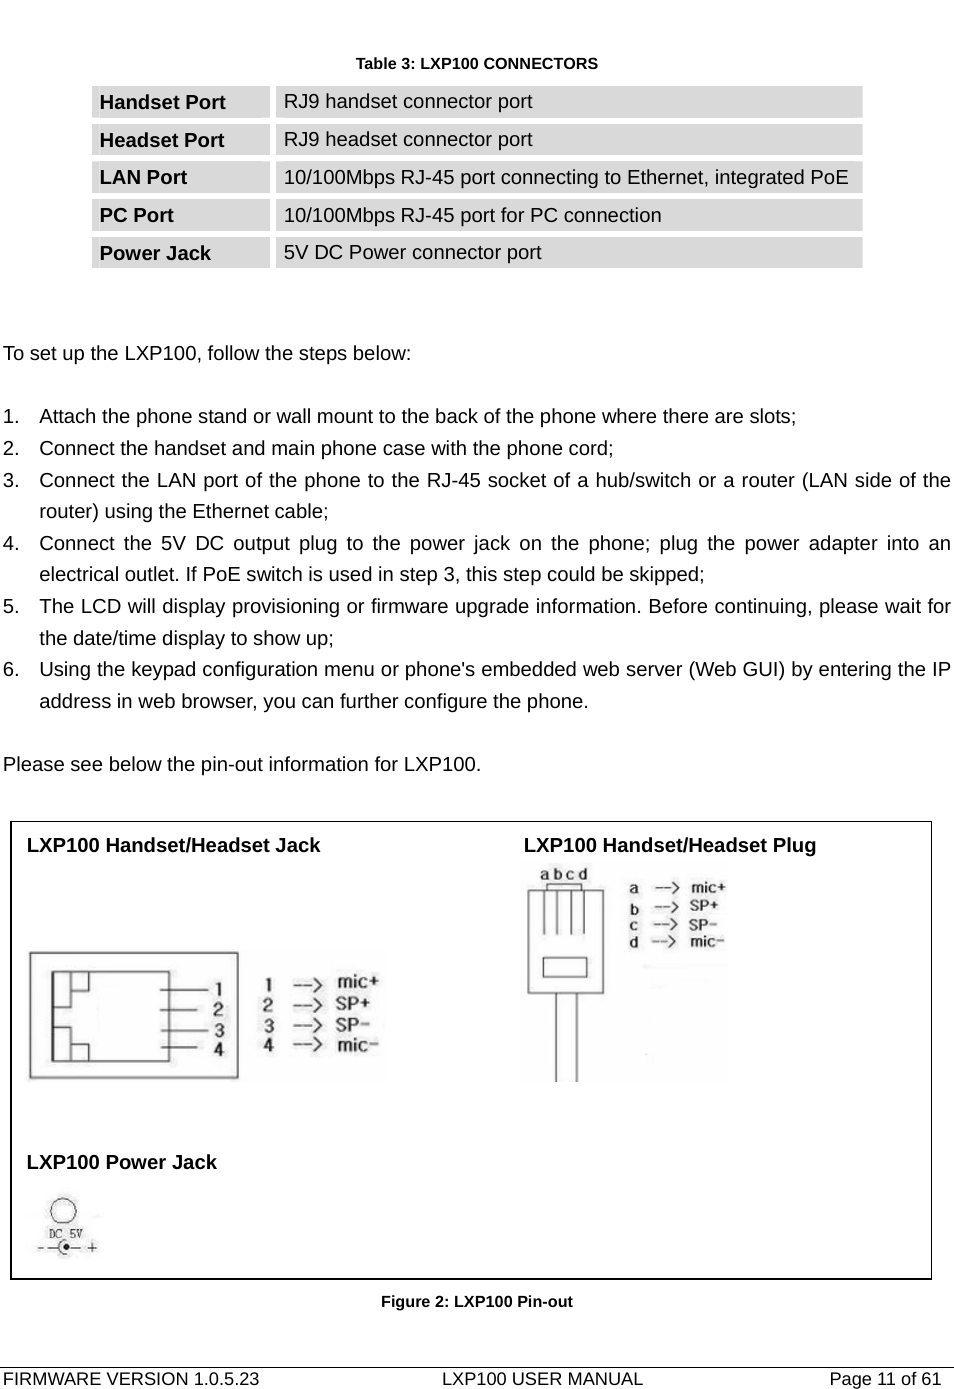   FIRMWARE VERSION 1.0.5.23                    LXP100 USER MANUAL                  Page 11 of 61                                   Table 3: LXP100 CONNECTORS Handset Port  RJ9 handset connector port Headset Port  RJ9 headset connector port LAN Port  10/100Mbps RJ-45 port connecting to Ethernet, integrated PoE PC Port  10/100Mbps RJ-45 port for PC connection Power Jack  5V DC Power connector port   To set up the LXP100, follow the steps below:  1.  Attach the phone stand or wall mount to the back of the phone where there are slots; 2.  Connect the handset and main phone case with the phone cord; 3.  Connect the LAN port of the phone to the RJ-45 socket of a hub/switch or a router (LAN side of the router) using the Ethernet cable; 4.  Connect the 5V DC output plug to the power jack on the phone; plug the power adapter into an electrical outlet. If PoE switch is used in step 3, this step could be skipped; 5.  The LCD will display provisioning or firmware upgrade information. Before continuing, please wait for the date/time display to show up; 6.  Using the keypad configuration menu or phone&apos;s embedded web server (Web GUI) by entering the IP address in web browser, you can further configure the phone.  Please see below the pin-out information for LXP100.                                                           Figure 2: LXP100 Pin-out LXP100 Handset/Headset Jack                    LXP100 Handset/Headset Plug                  LXP100 Power Jack  